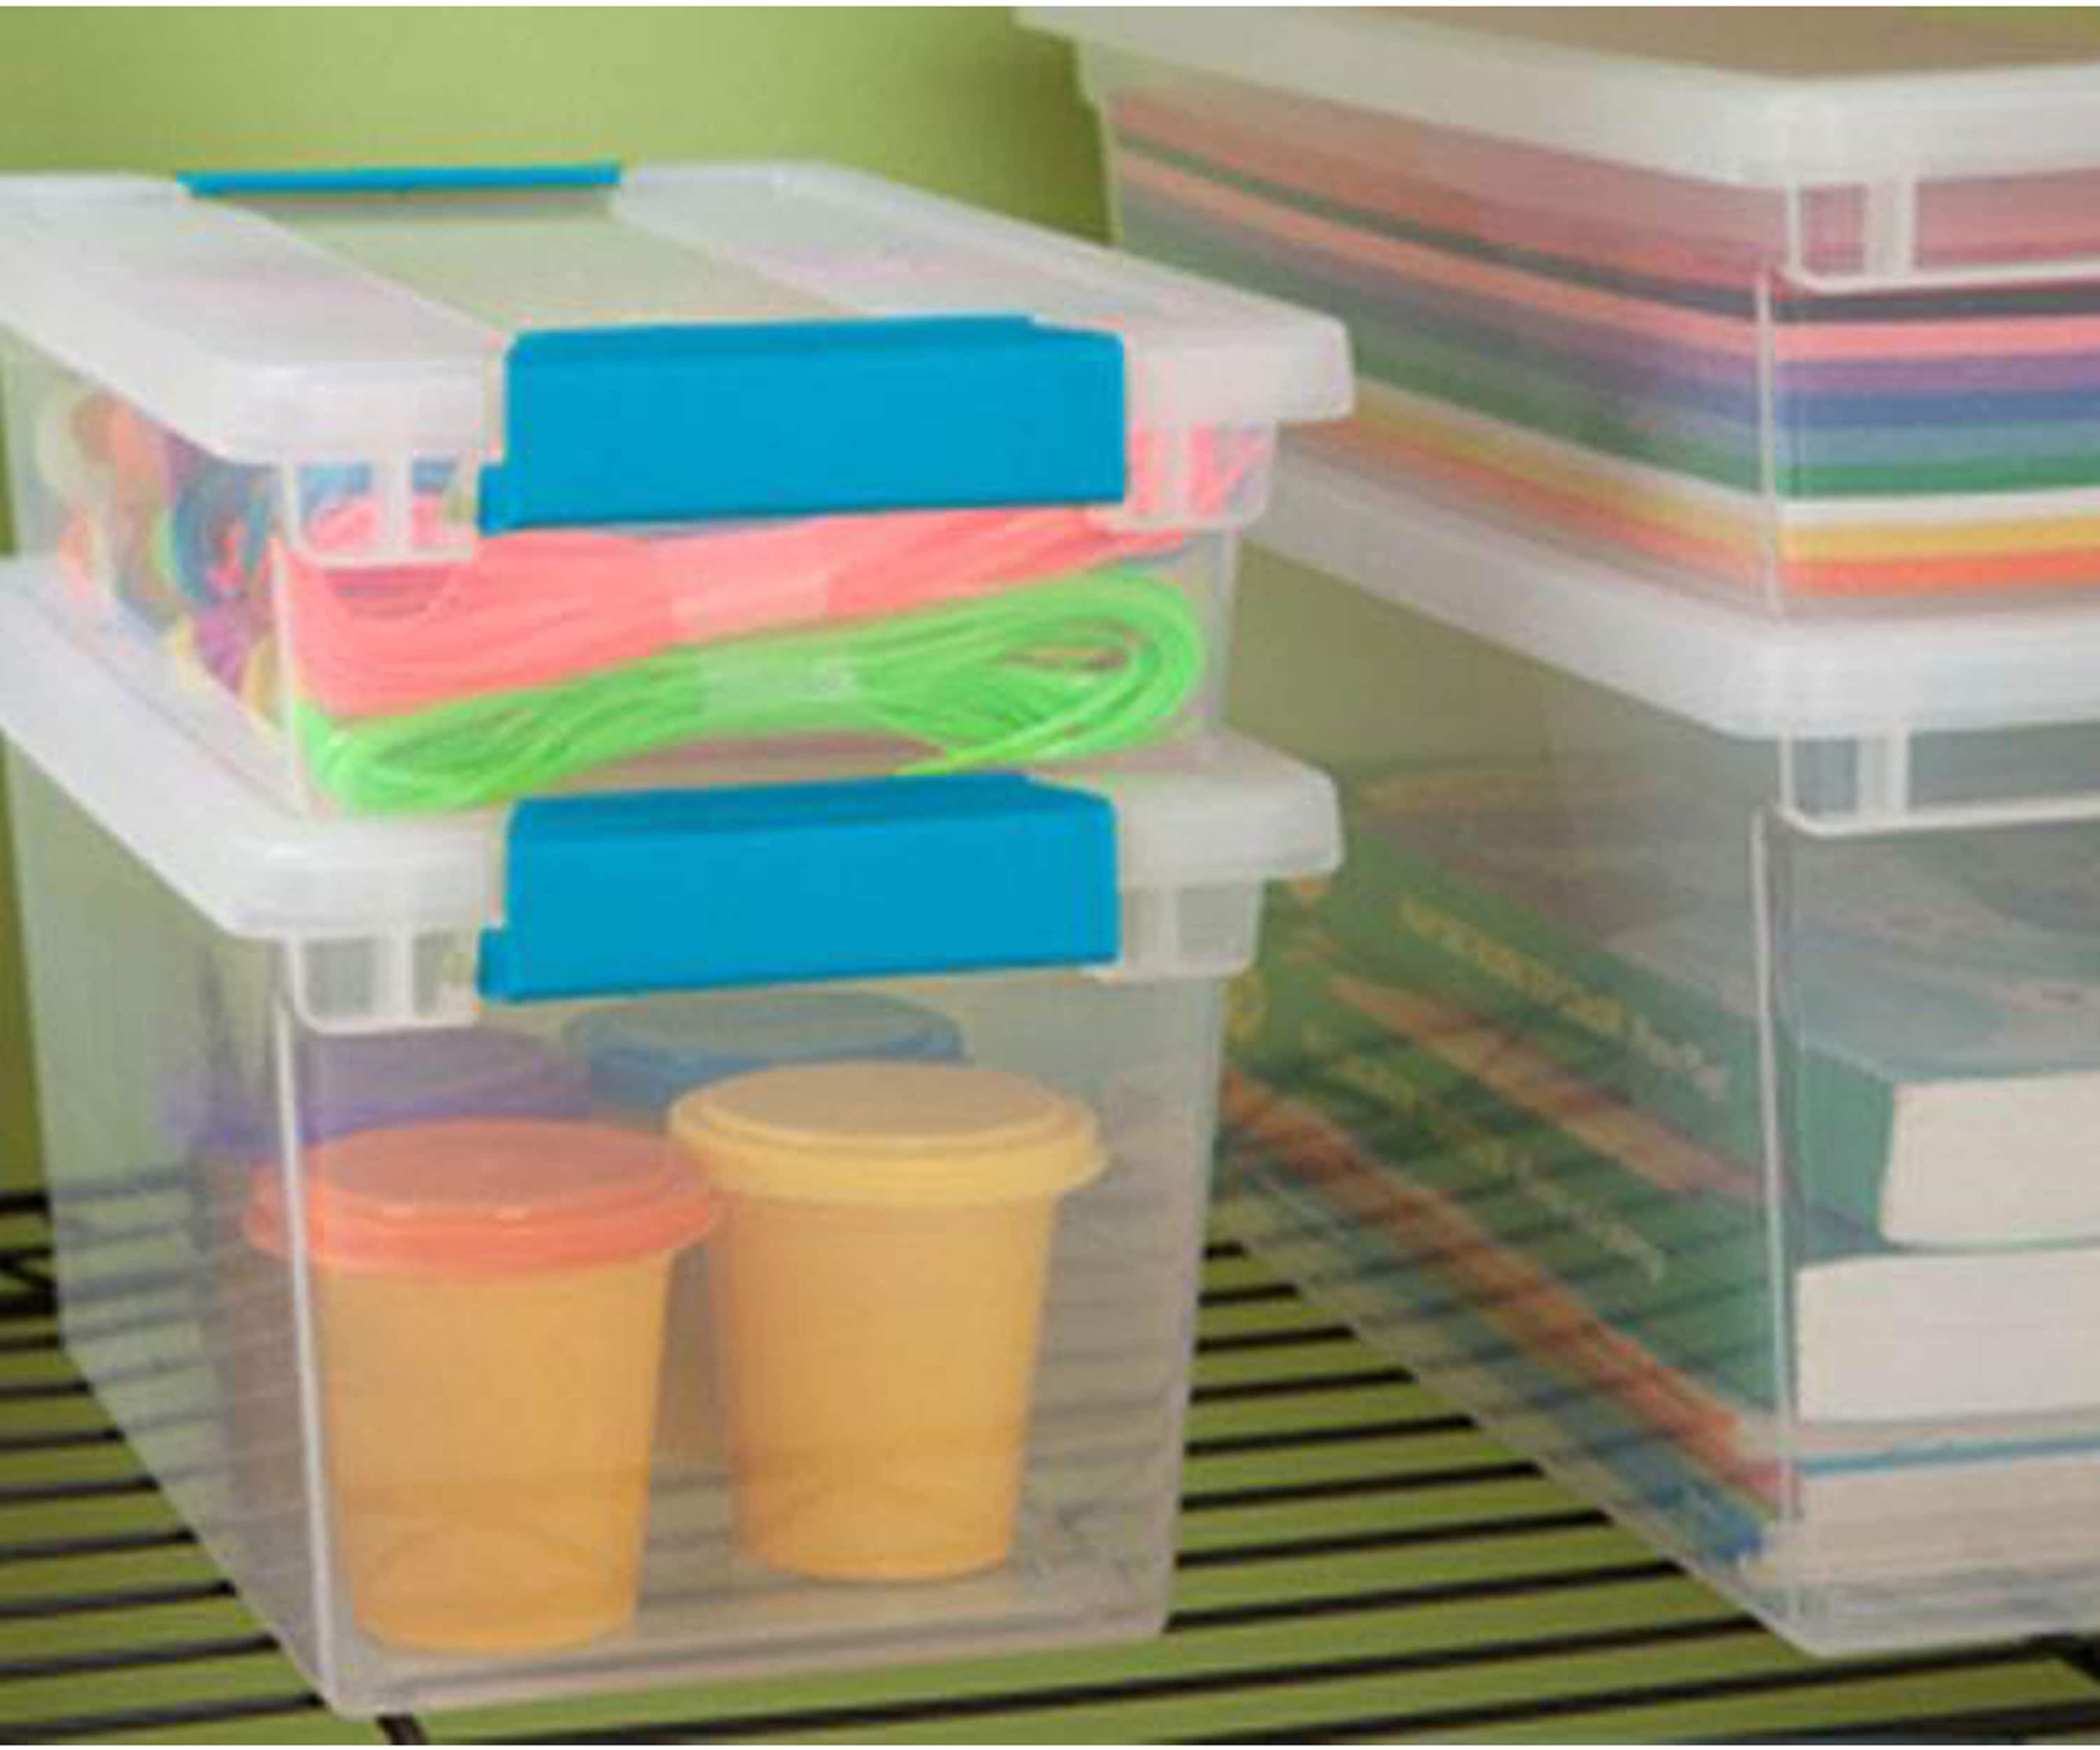 Sterilite Medium Clip Box Clear Storage Tote Container with Lid 8 Pack